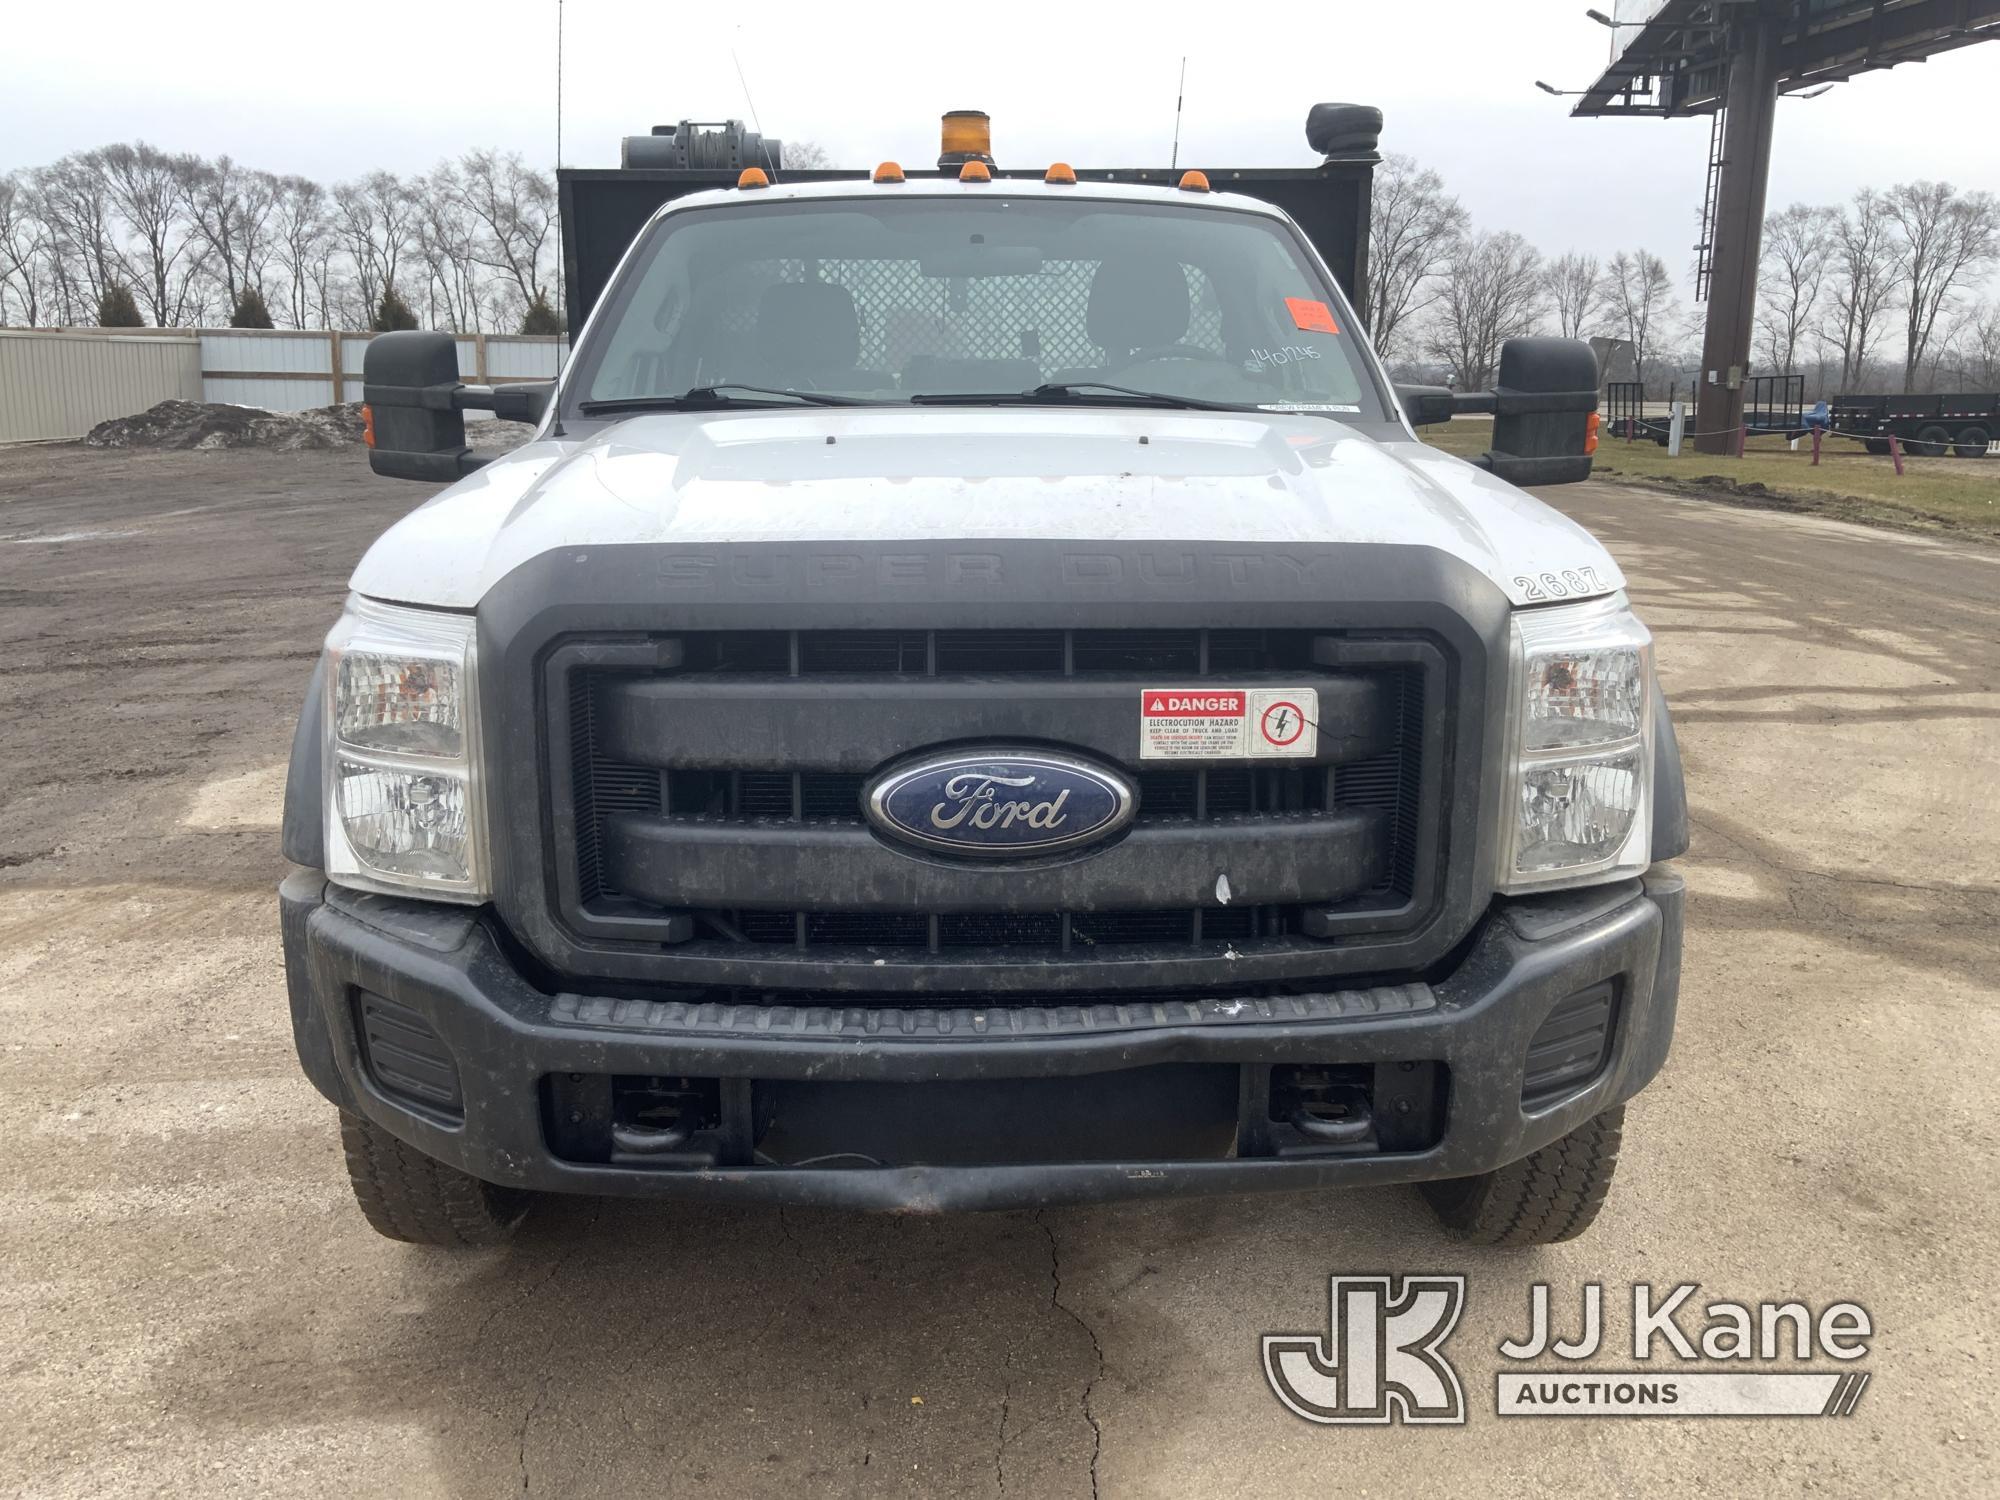 (South Beloit, IL) 2012 Ford F450 4x4 Flatbed Truck Runs, Moves